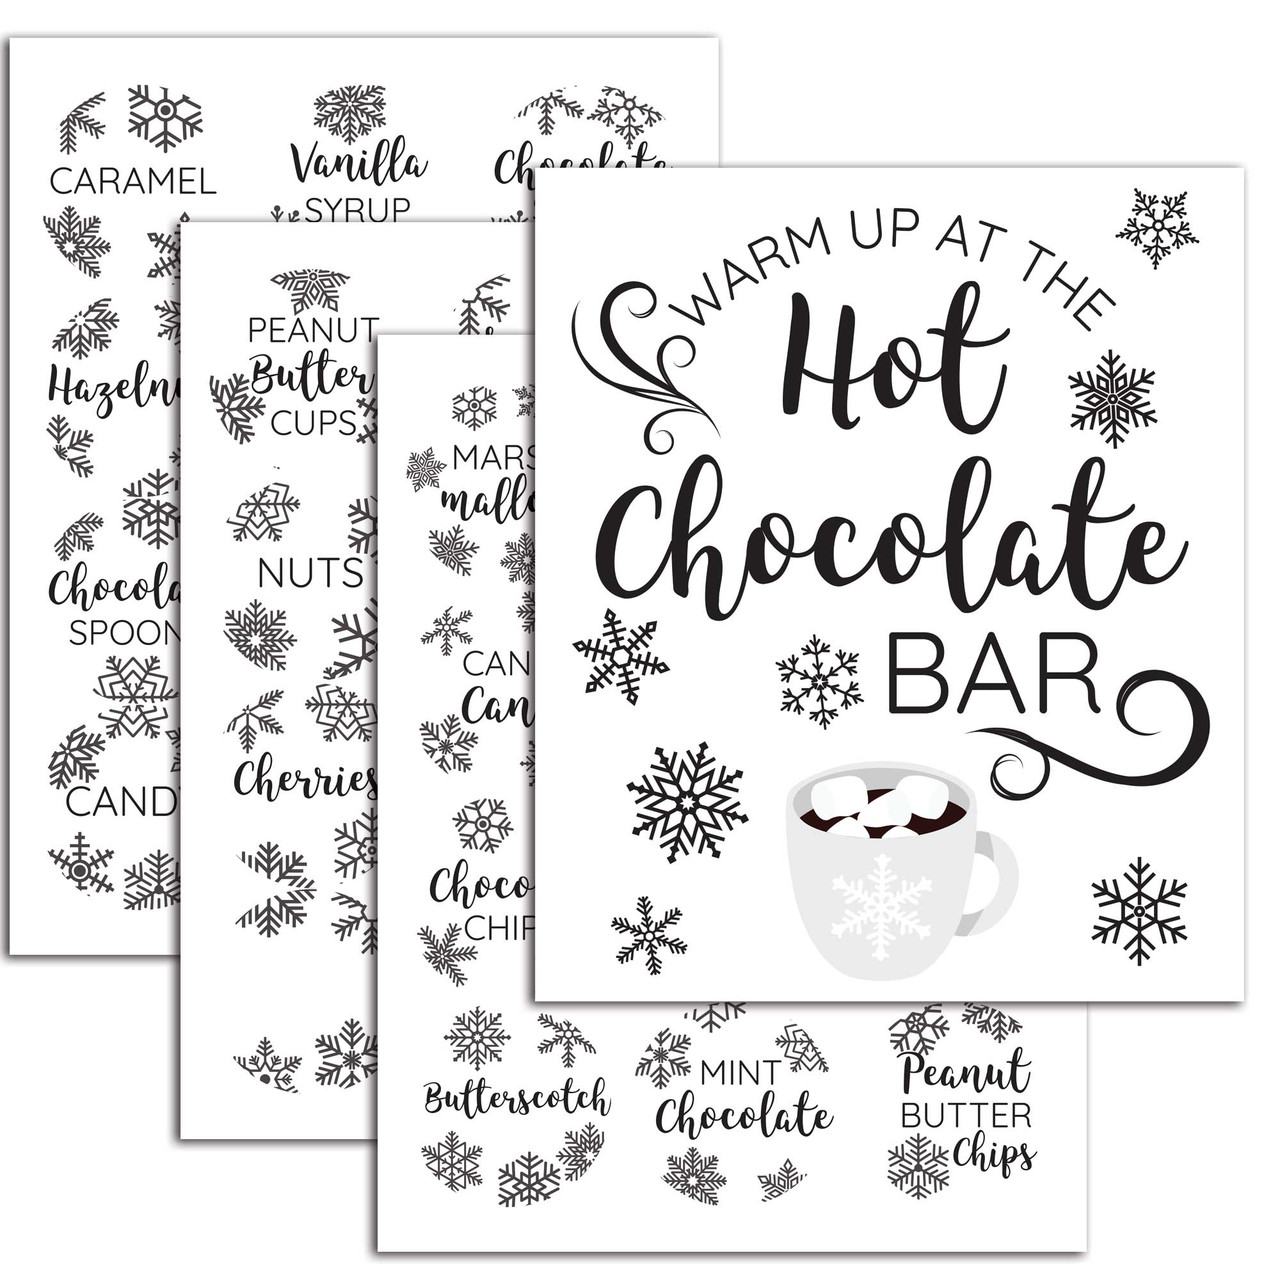 How to create a hot chocolate bar & free printables! - Girl about